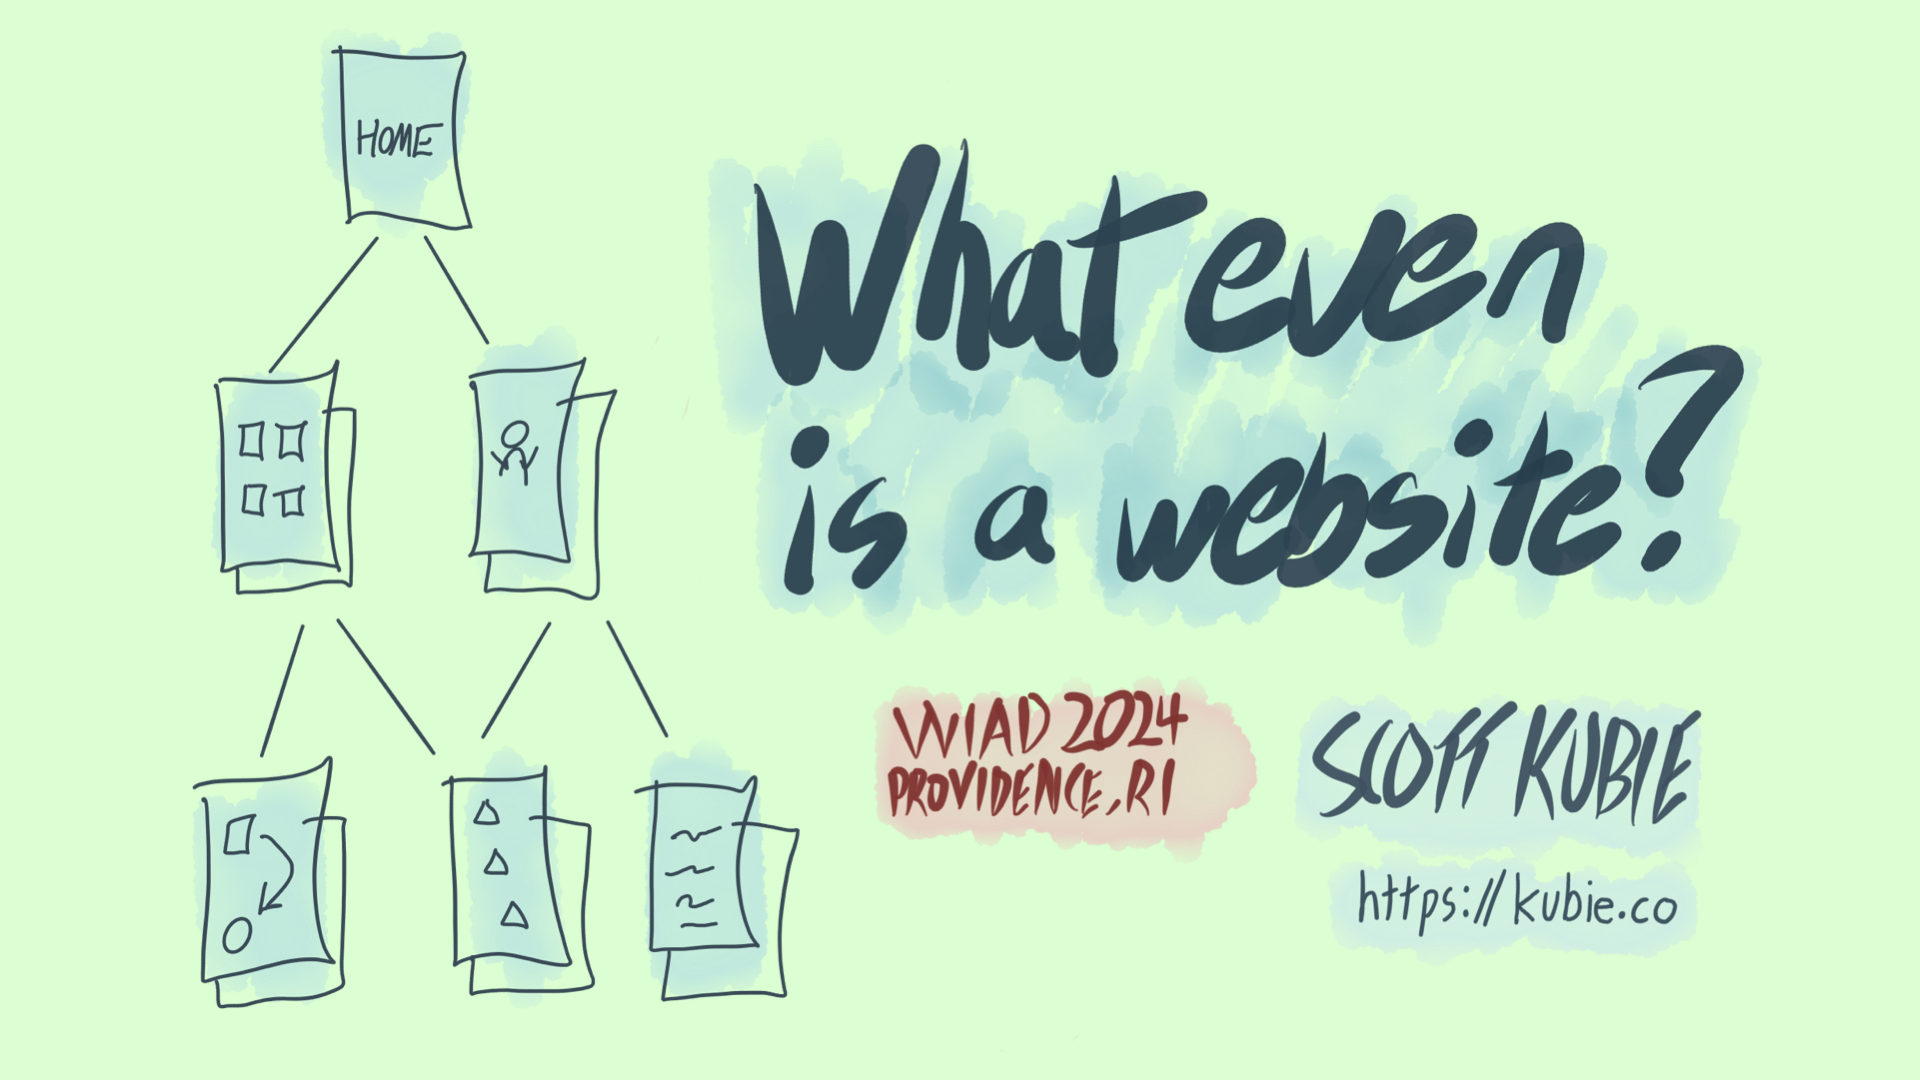 What even is a website? Delivered by Scott Kubie at World IA Day Providence, 2024.